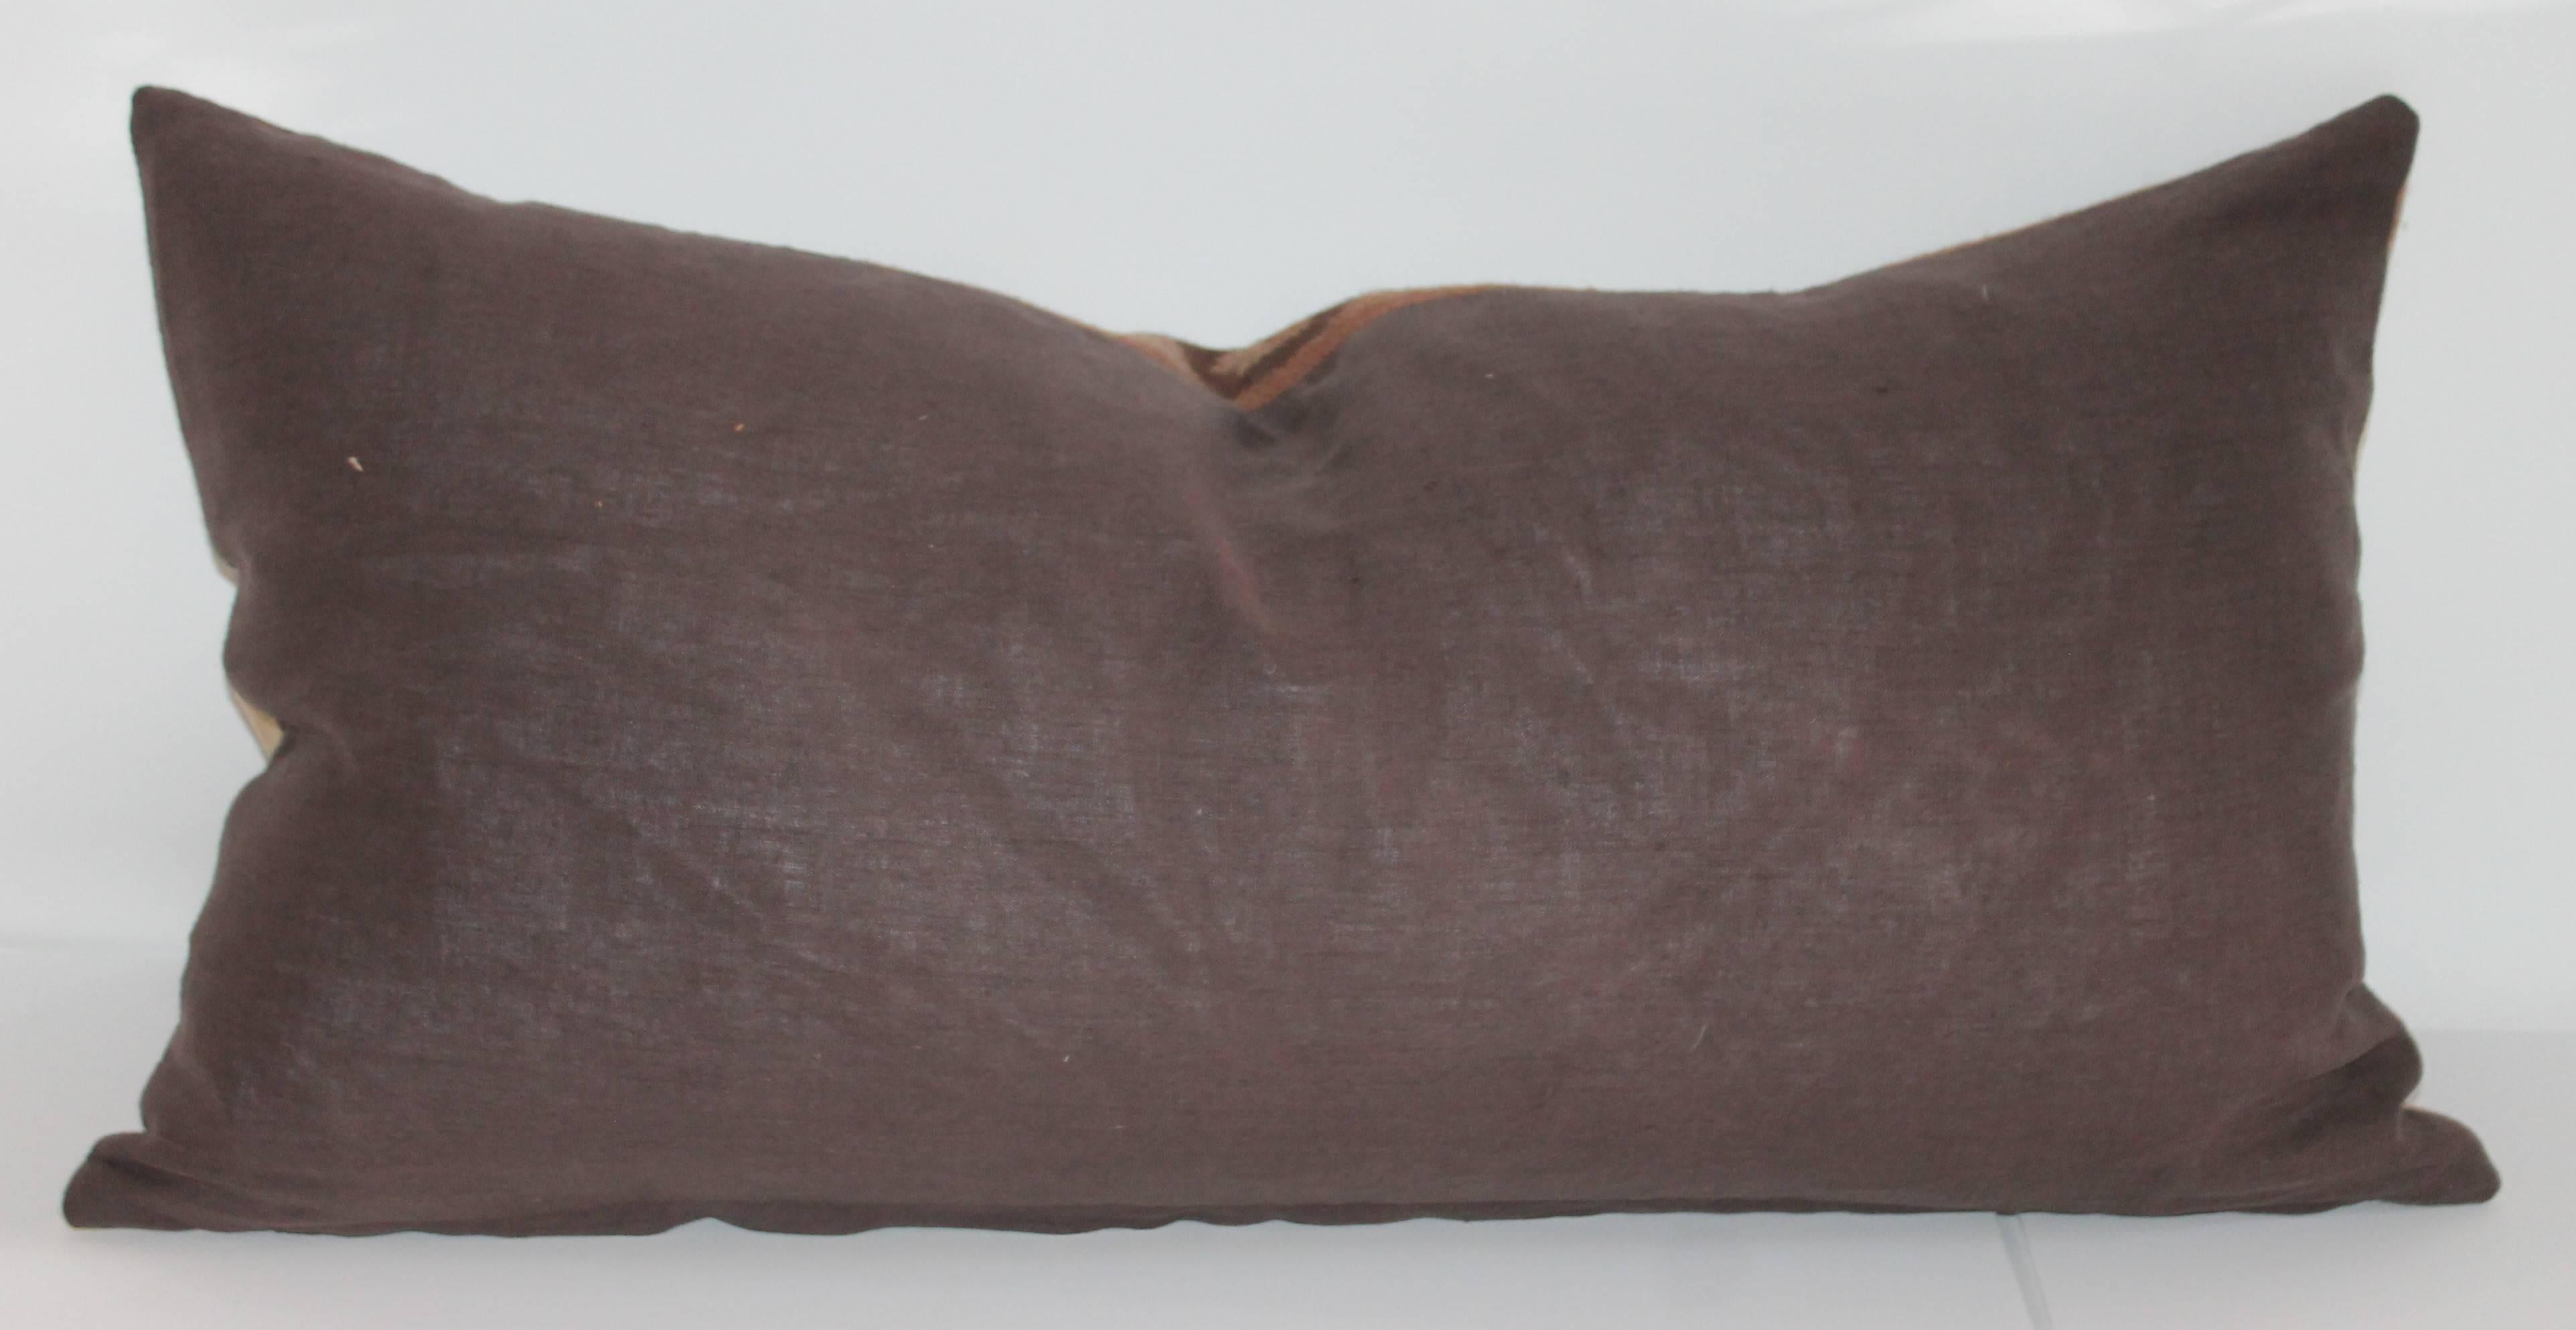 20th Century Group of Three Indian Design Camp Blanket Pillows